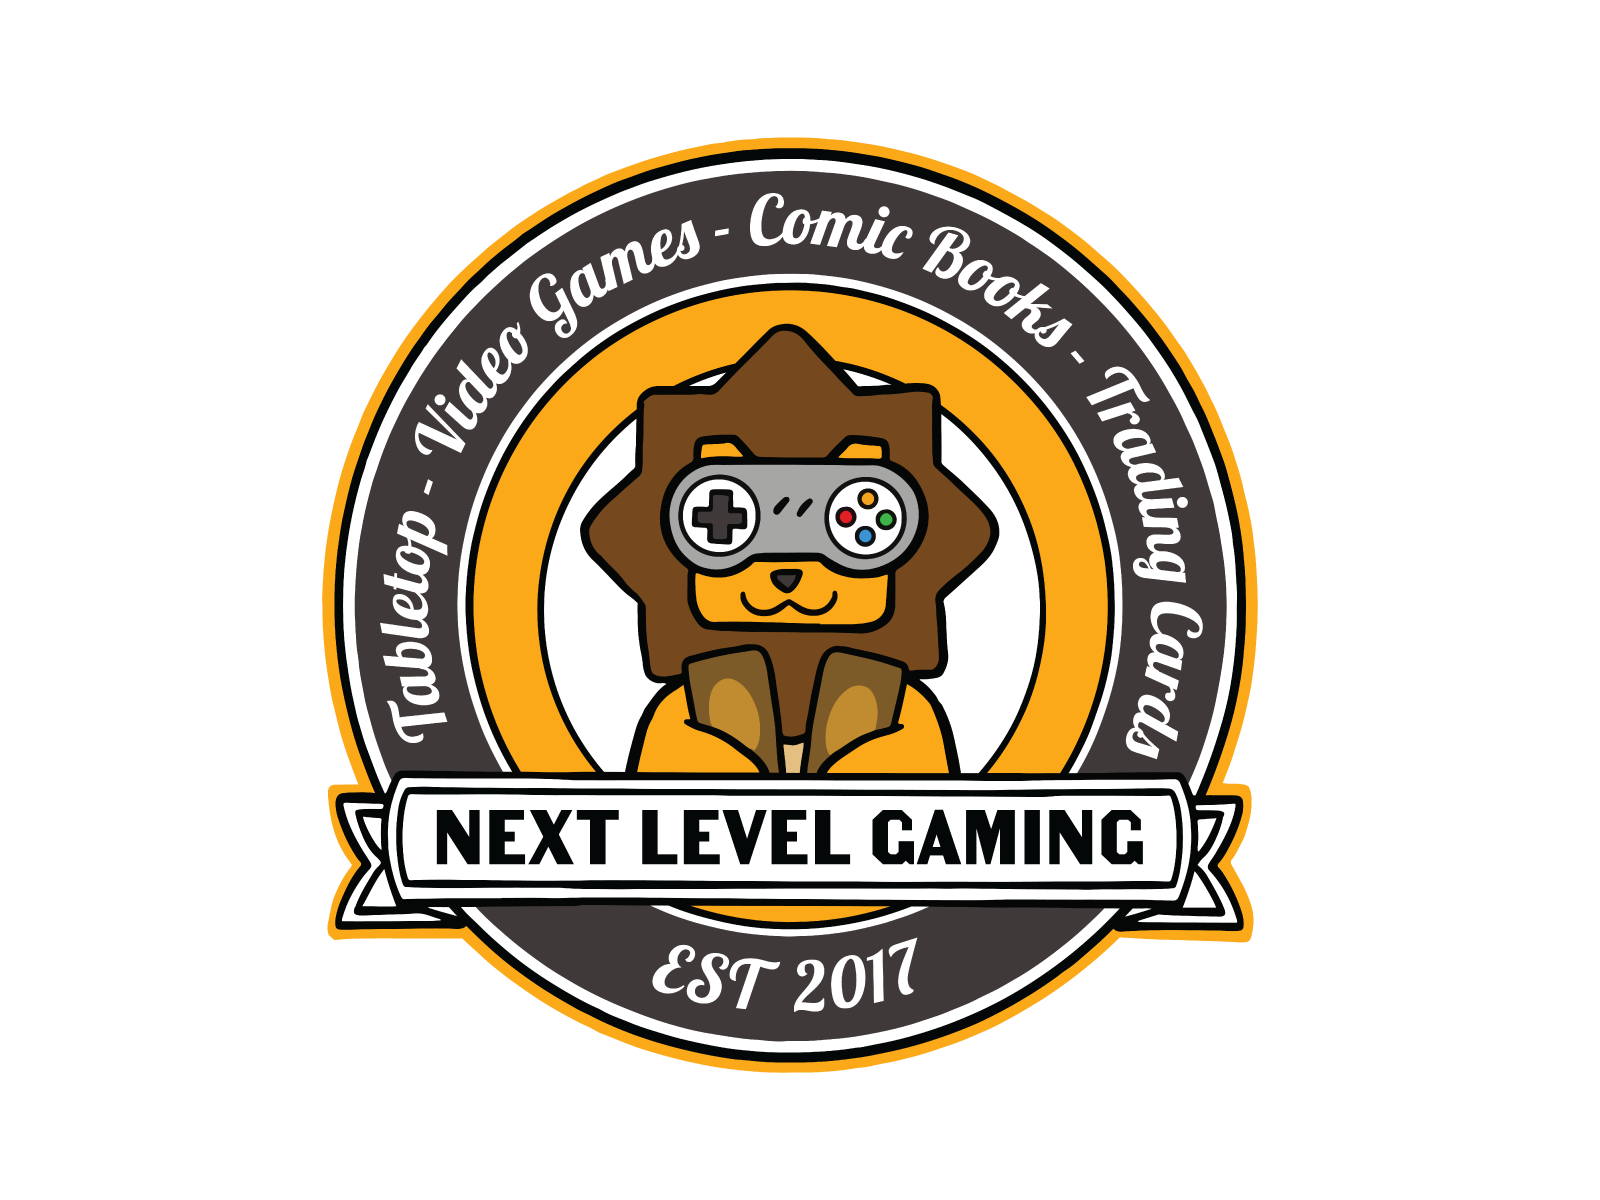 Next Level Gaming Logo By James Watson On Dribbble